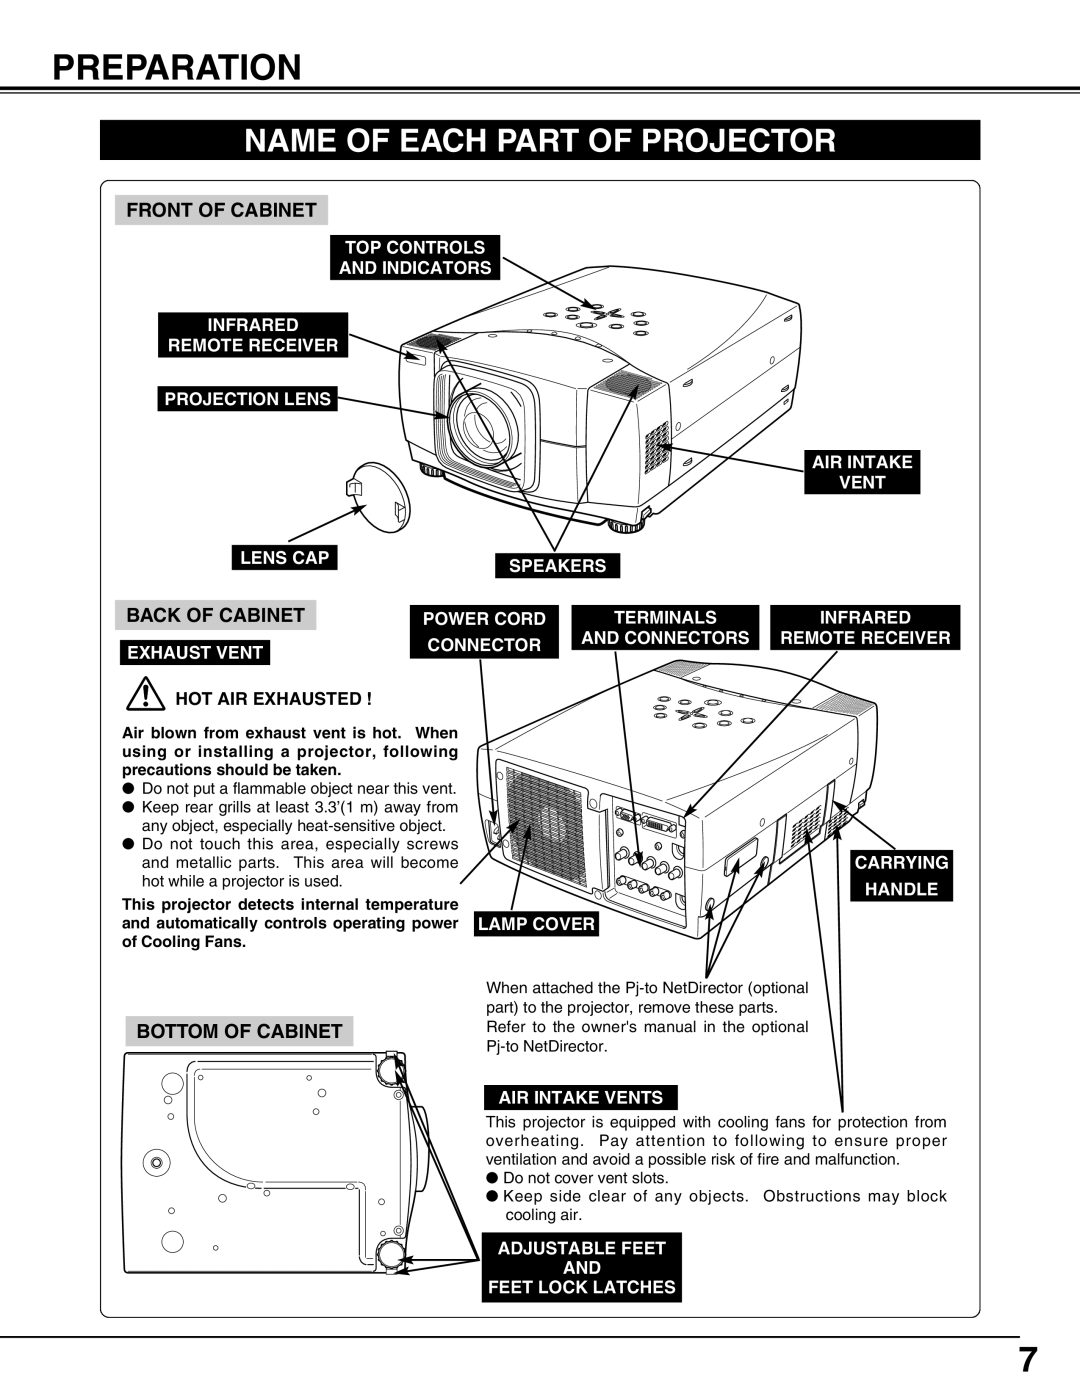 Eiki LC-W3 Preparation, Name Of Each Part Of Projector, Front Of Cabinet, Back Of Cabinet, Bottom Of Cabinet 